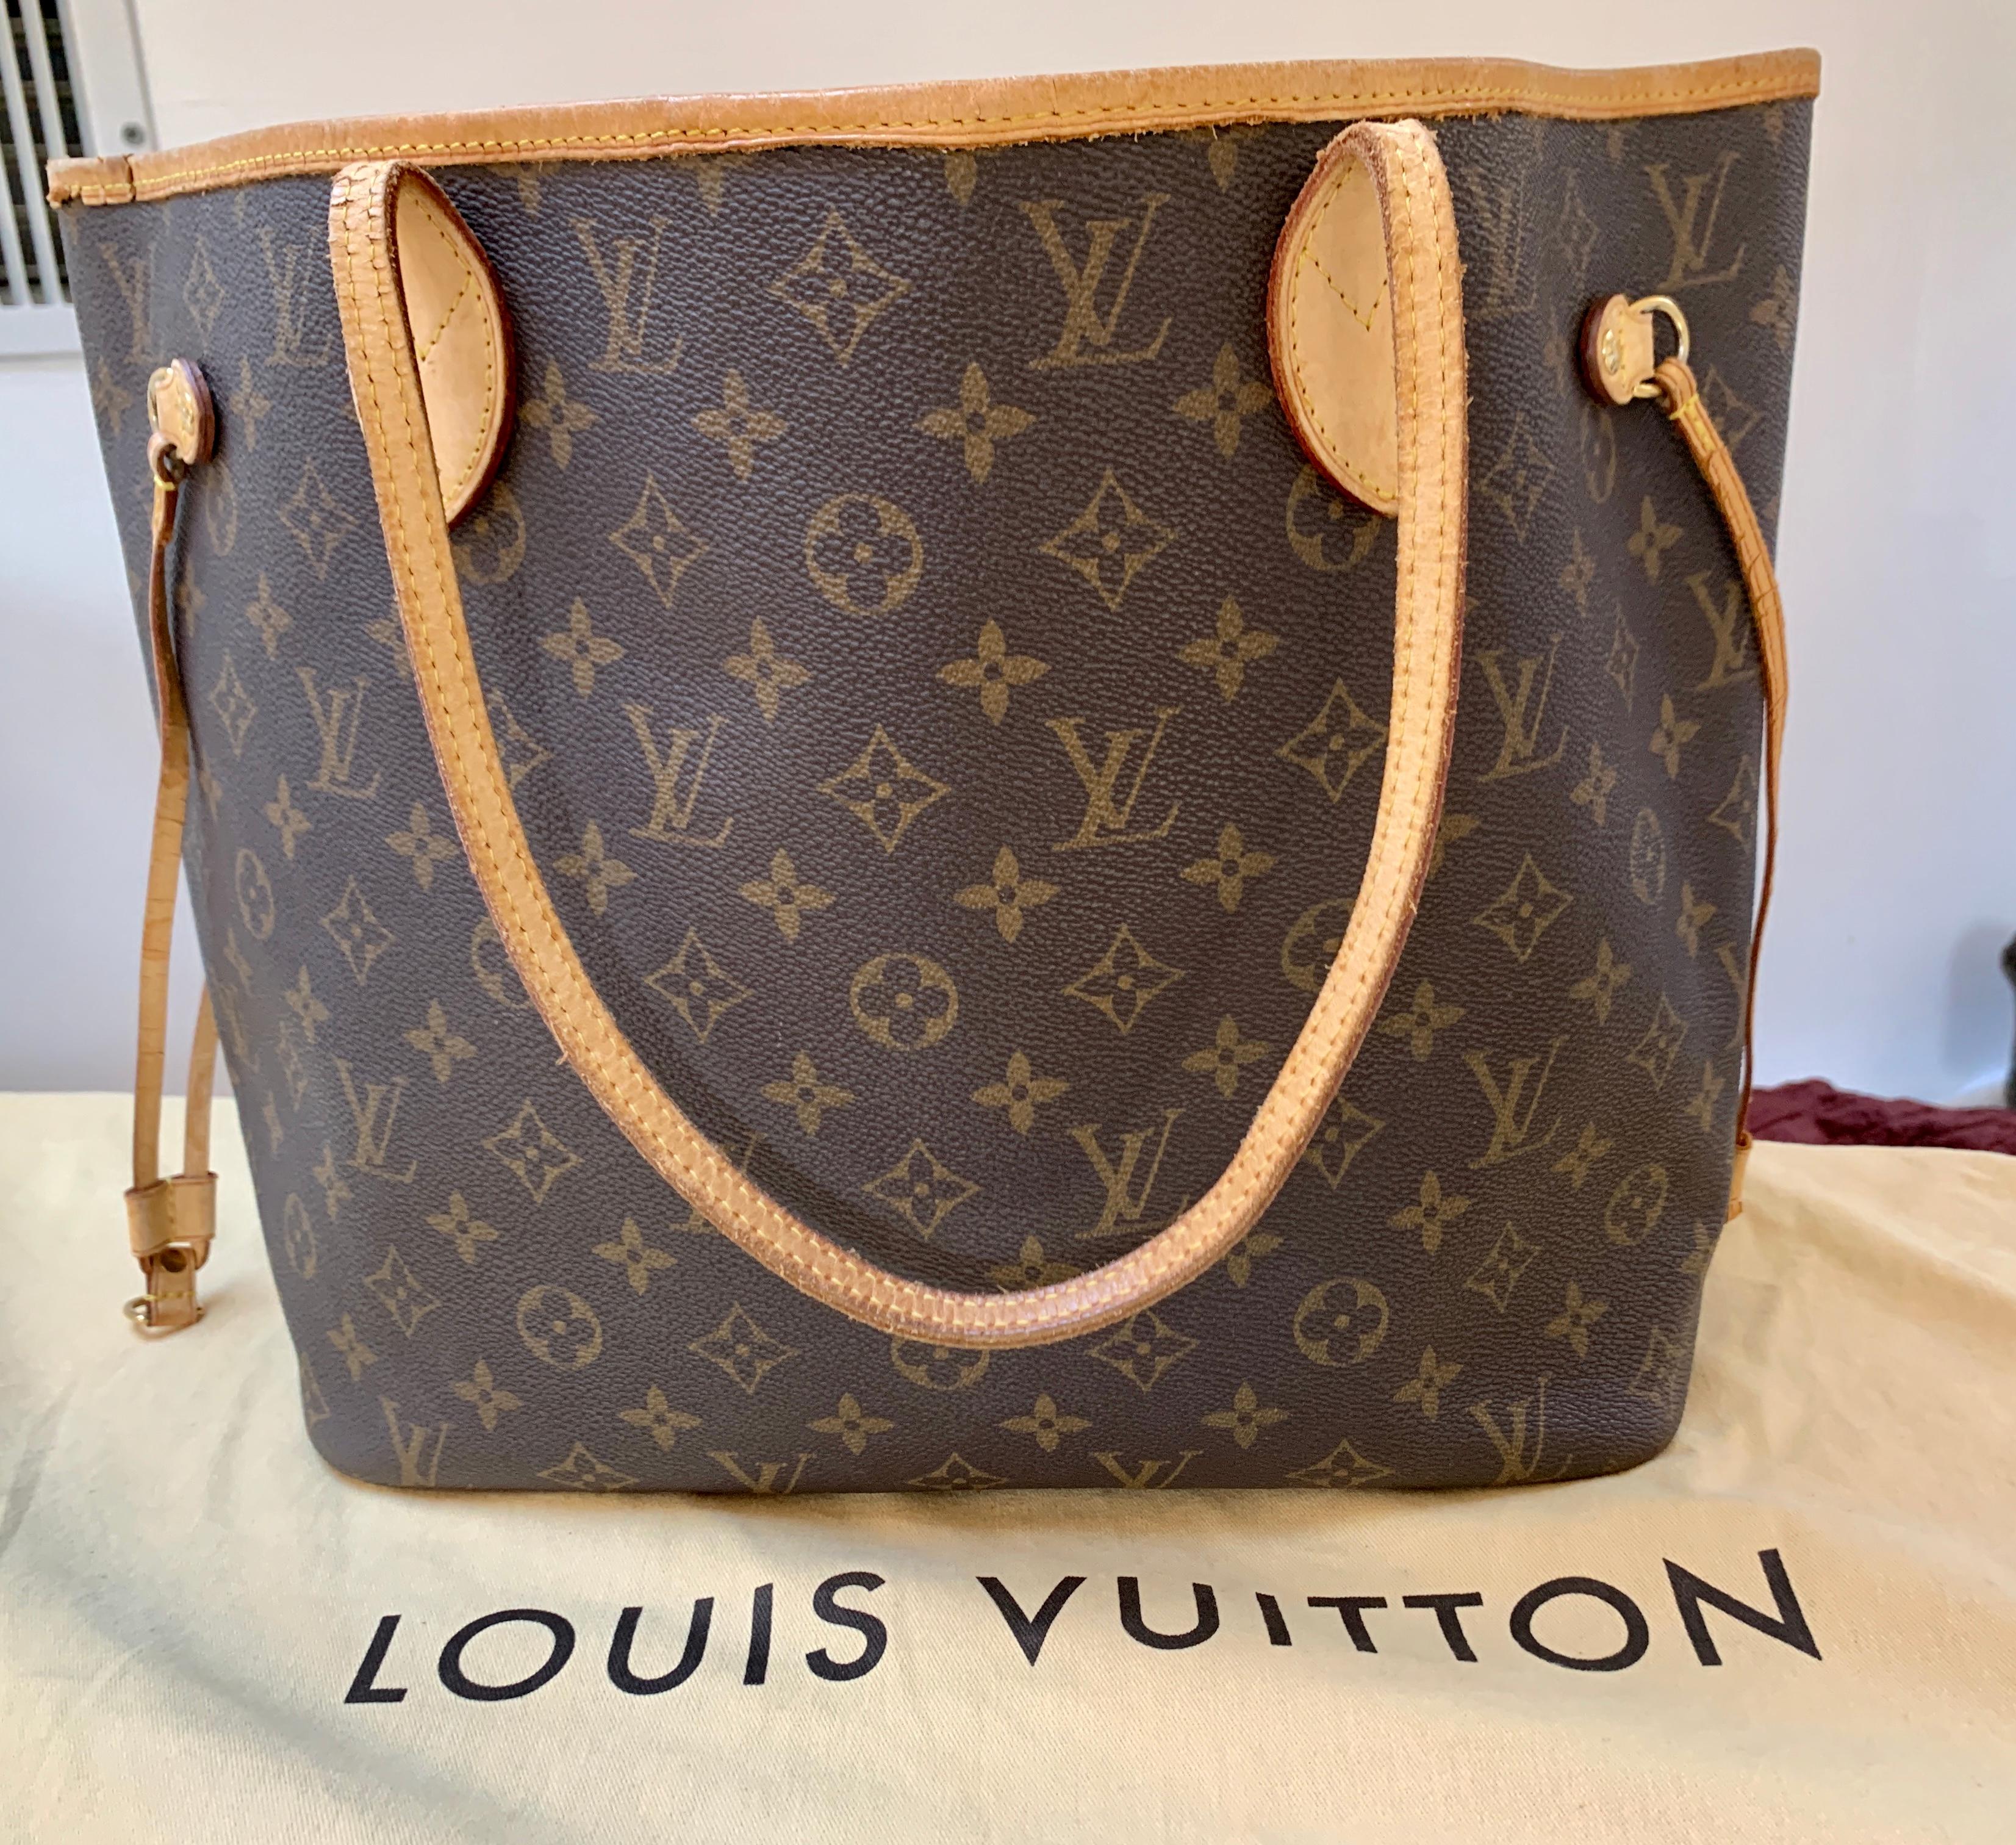 Brown and tan monogram coated canvas Louis Vuitton Neverfull MM with brass hardware, dual flat shoulder straps, tan Vachetta leather trim, drawstring accents at sides, tonal striped canvas lining, single zip pocket at interior wall and clasp closure